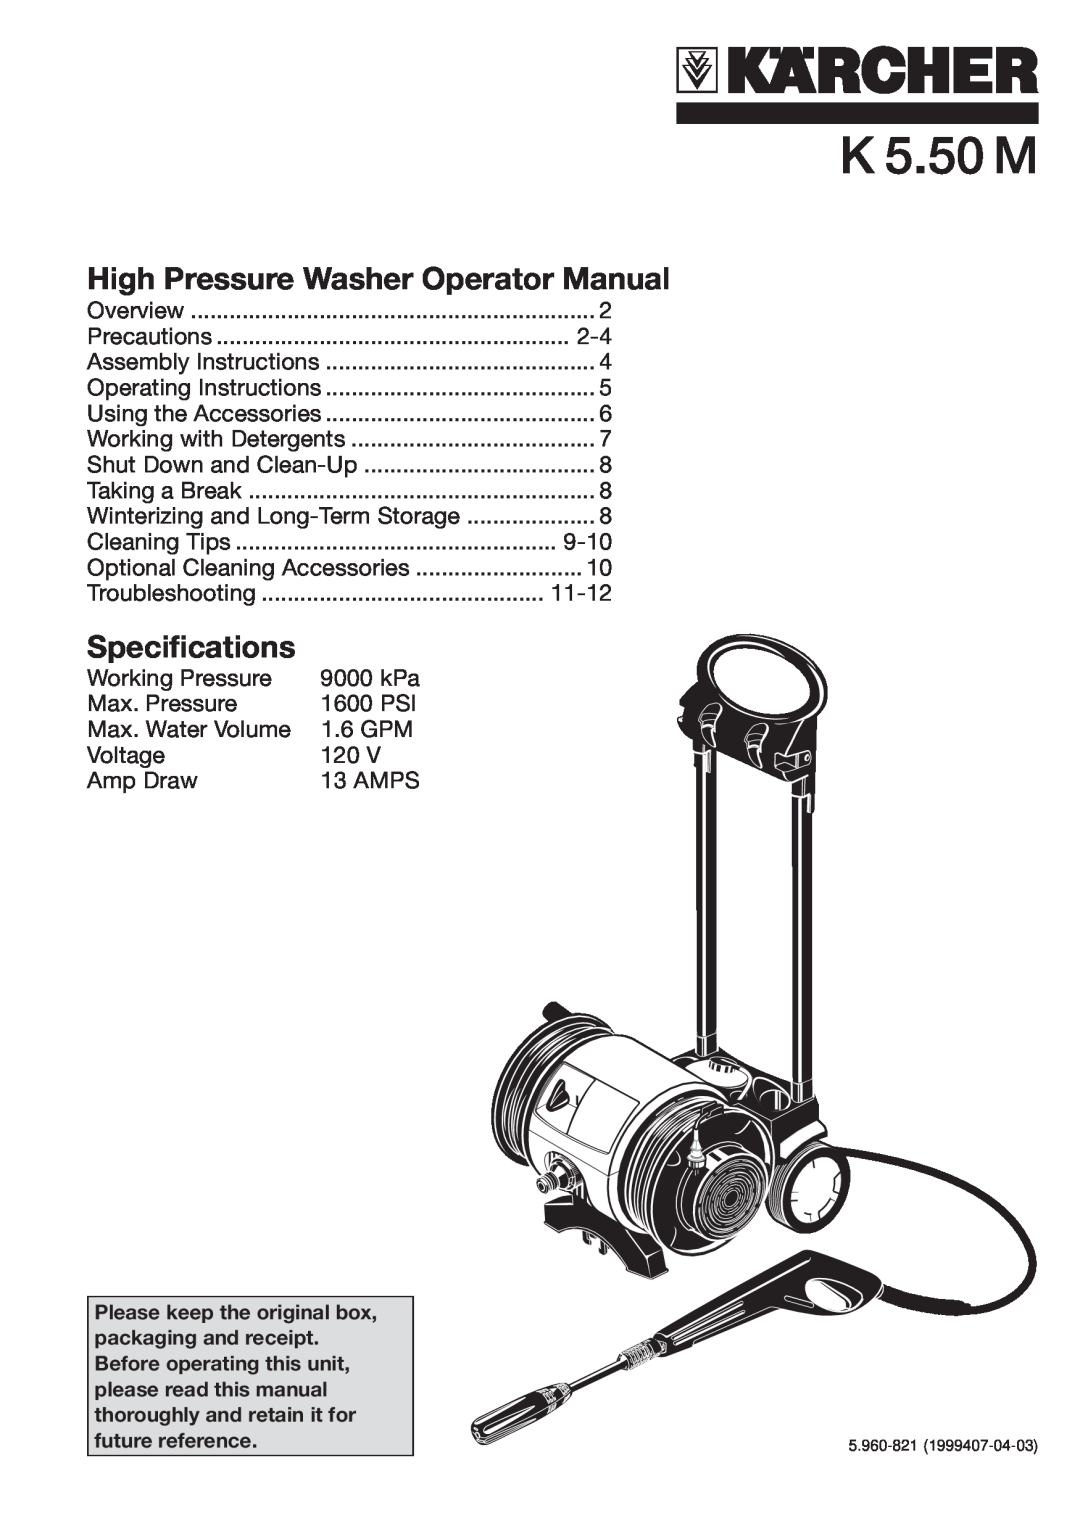 Karcher K 5.50 M specifications High Pressure Washer Operator Manual, Specifications 